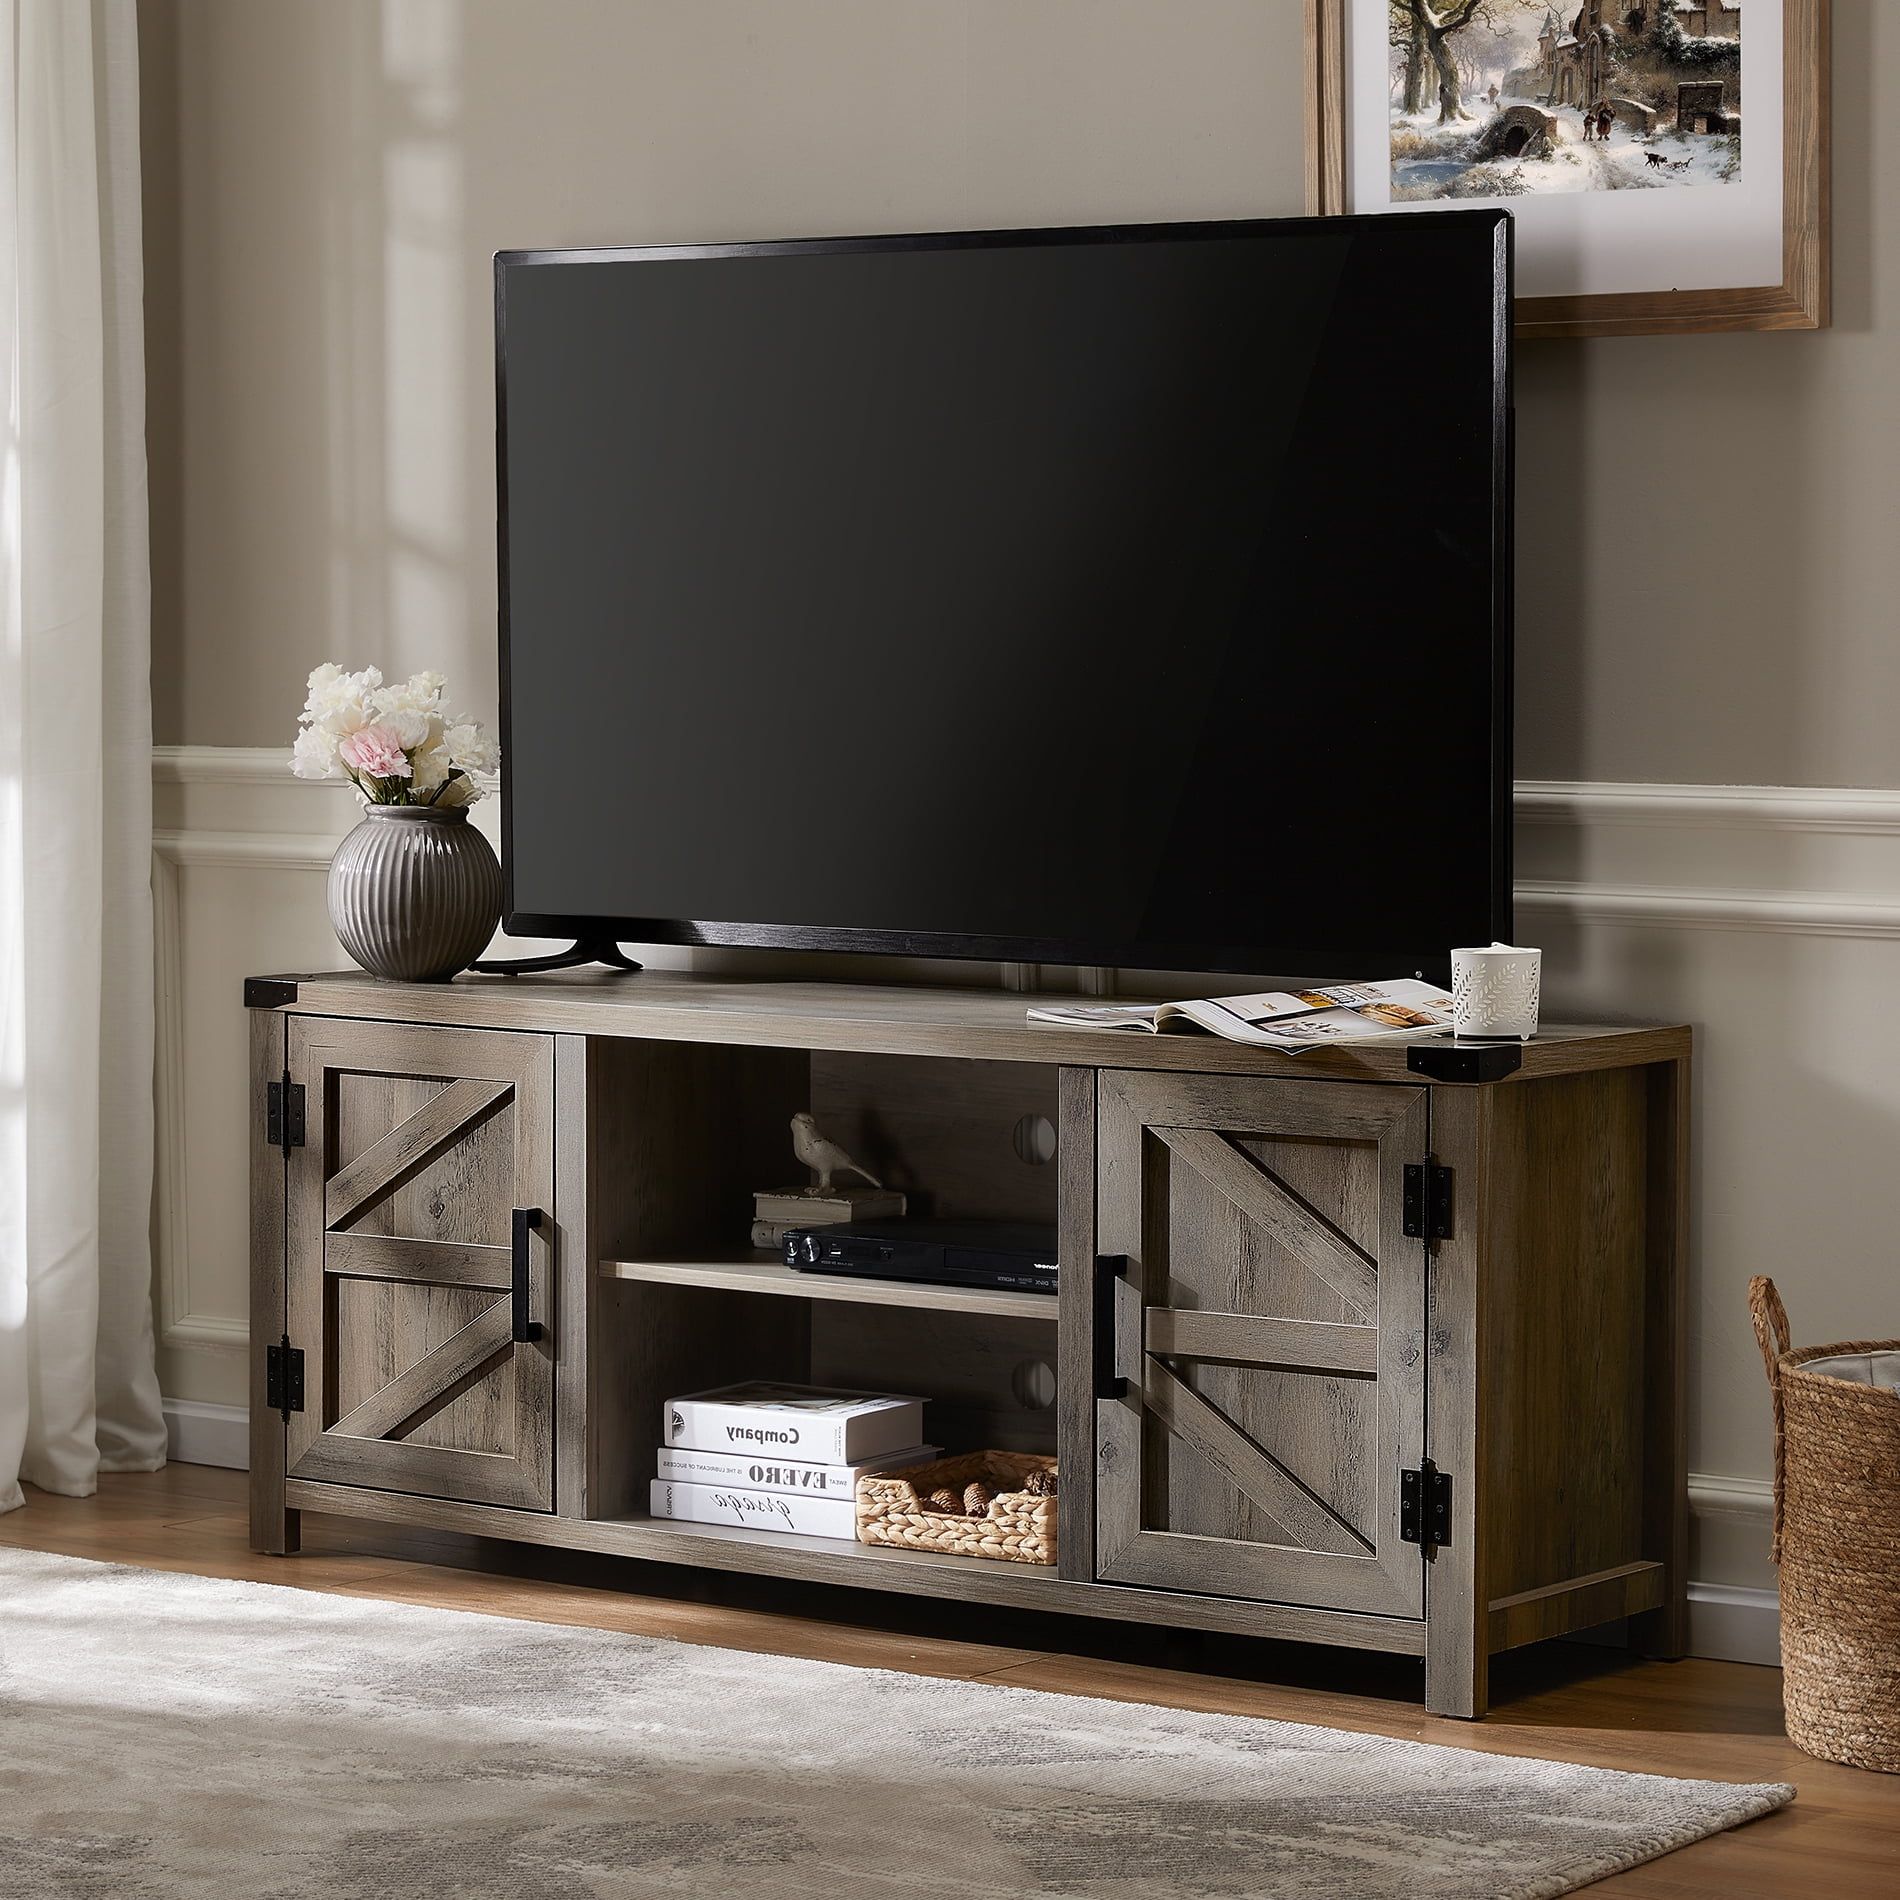 Buy Fitueyes Farmhouse Barn Door Wood Tv Stands For 70 Flat Screen Intended For Farmhouse Rattan Tv Stands (View 20 of 20)